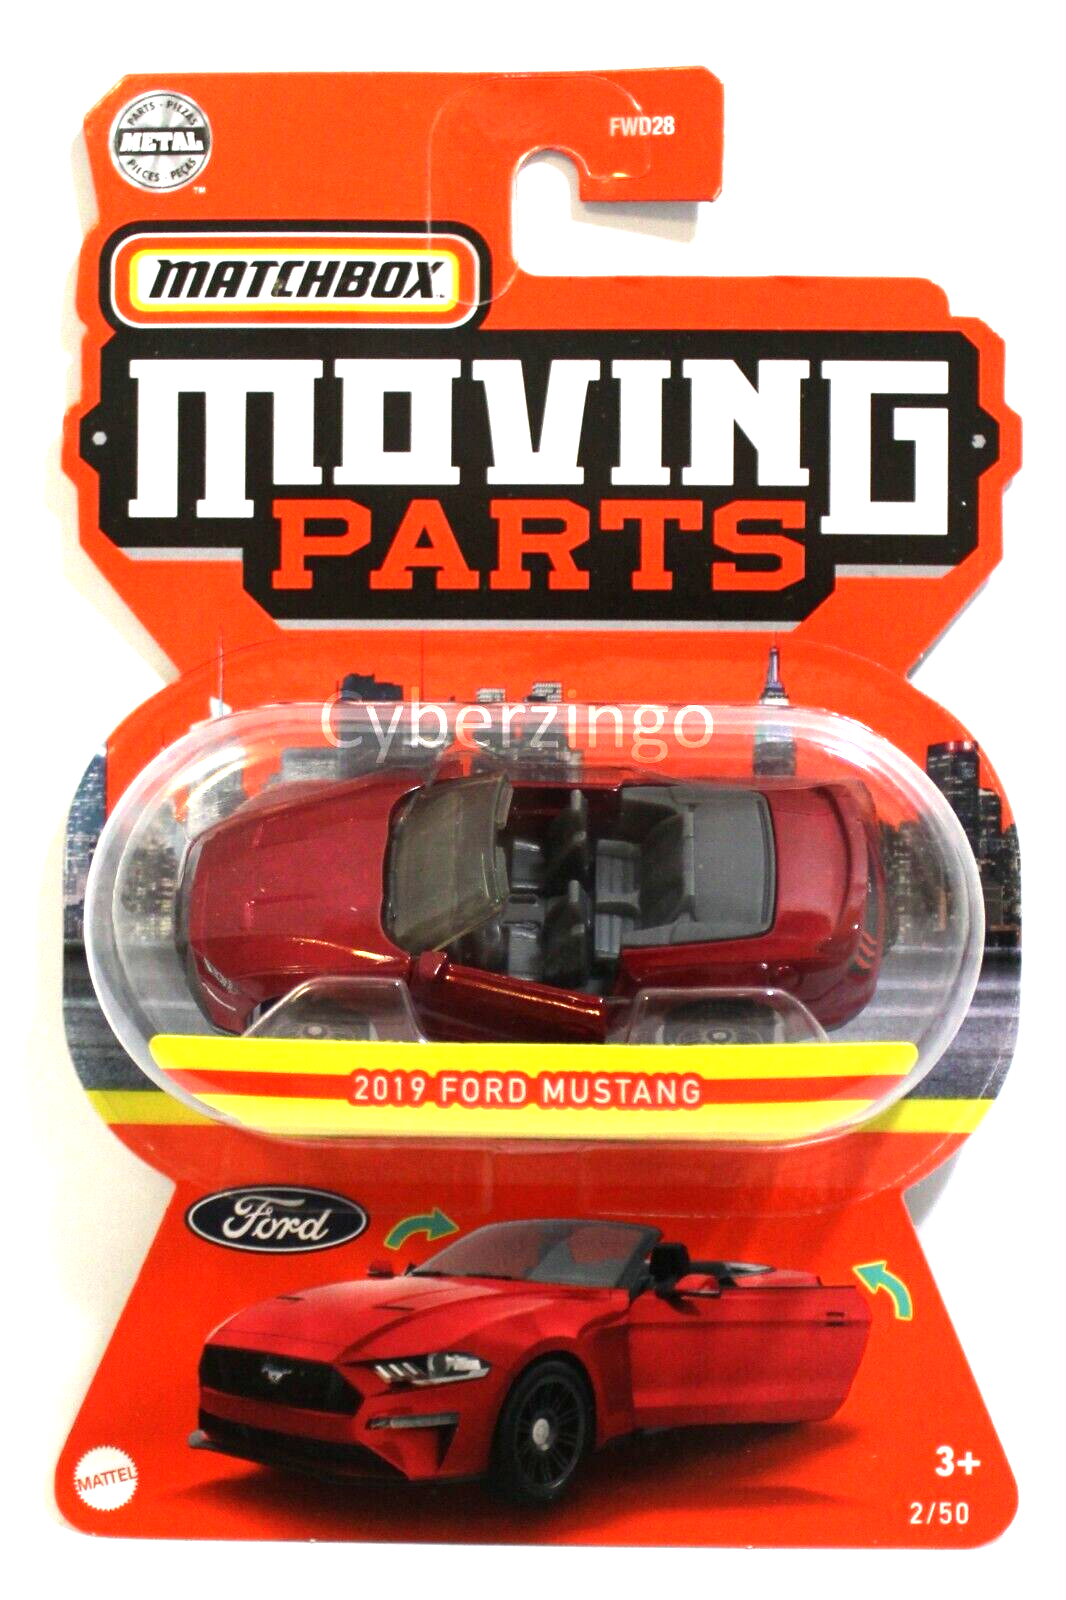 1:64 Matchbox Moving Parts 2019 Ford Mustang Diecast Model Car Red NEW - $13.98